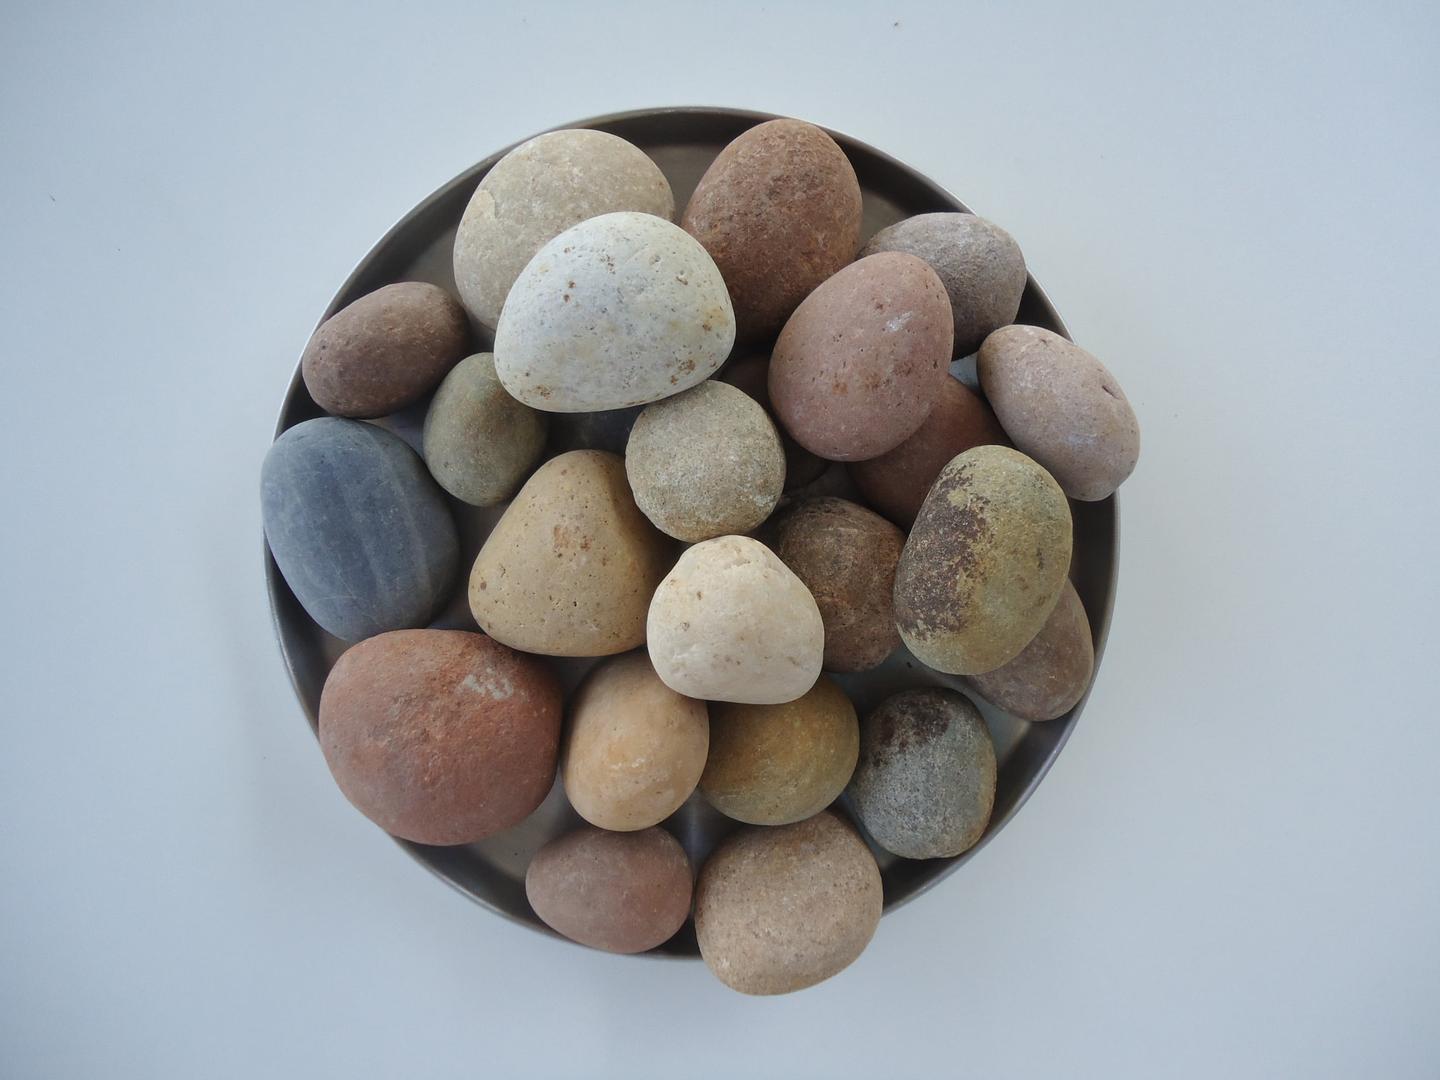 Large pebbles in a bowl